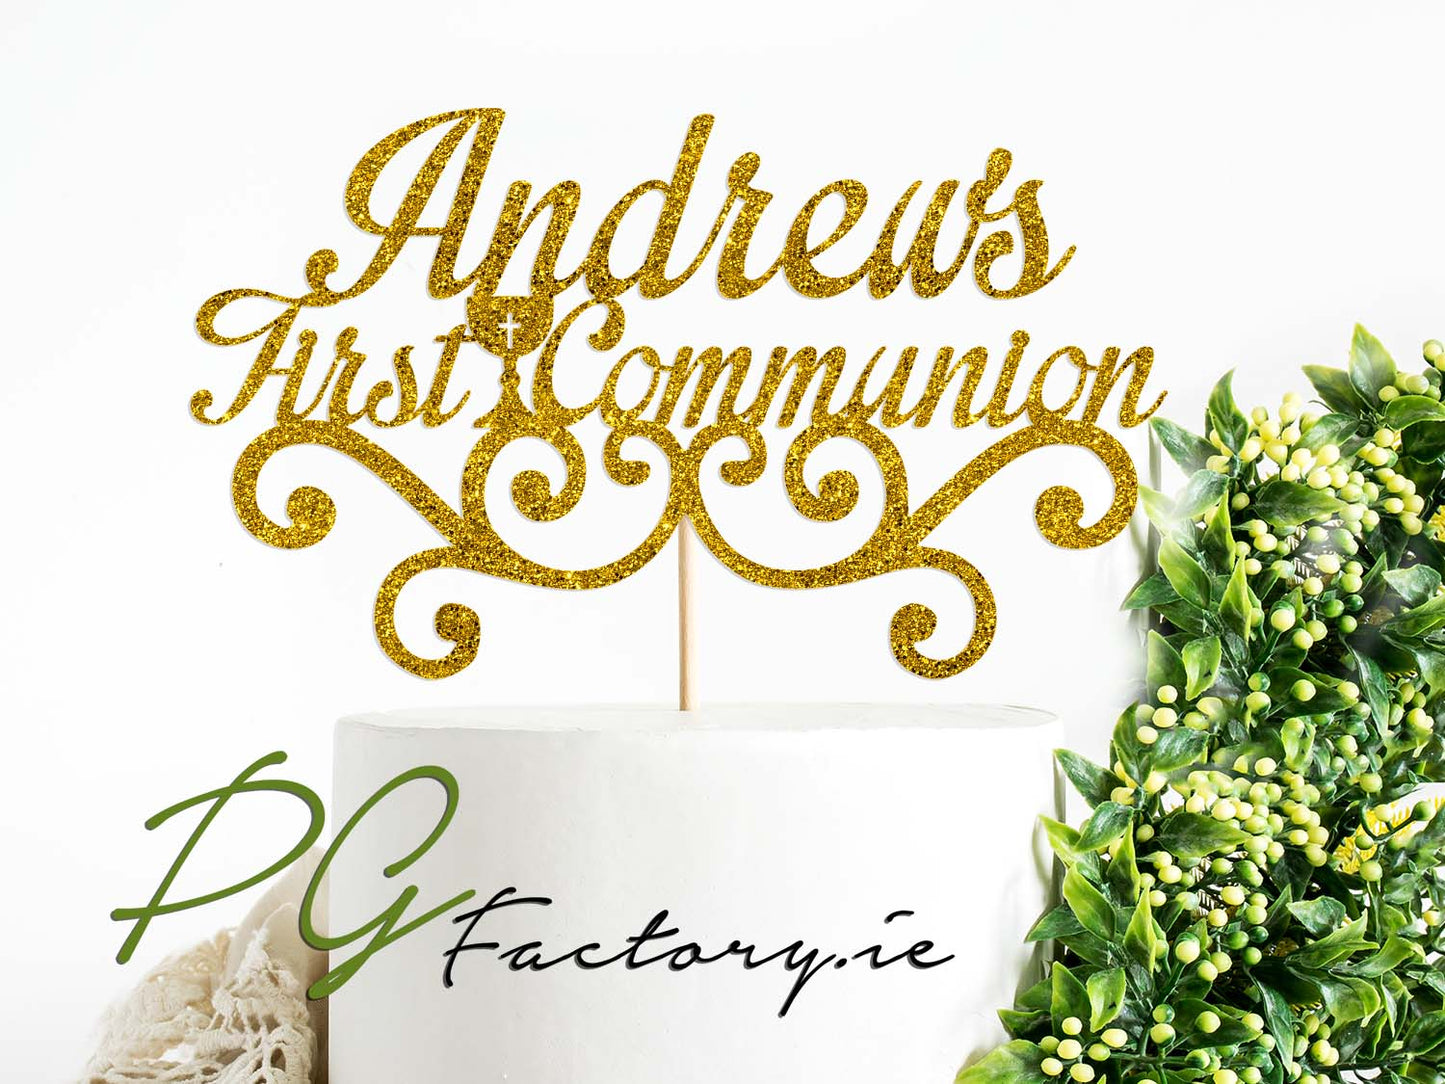 Personalised Holy Communion Glitter Cake Topper - PG Factory